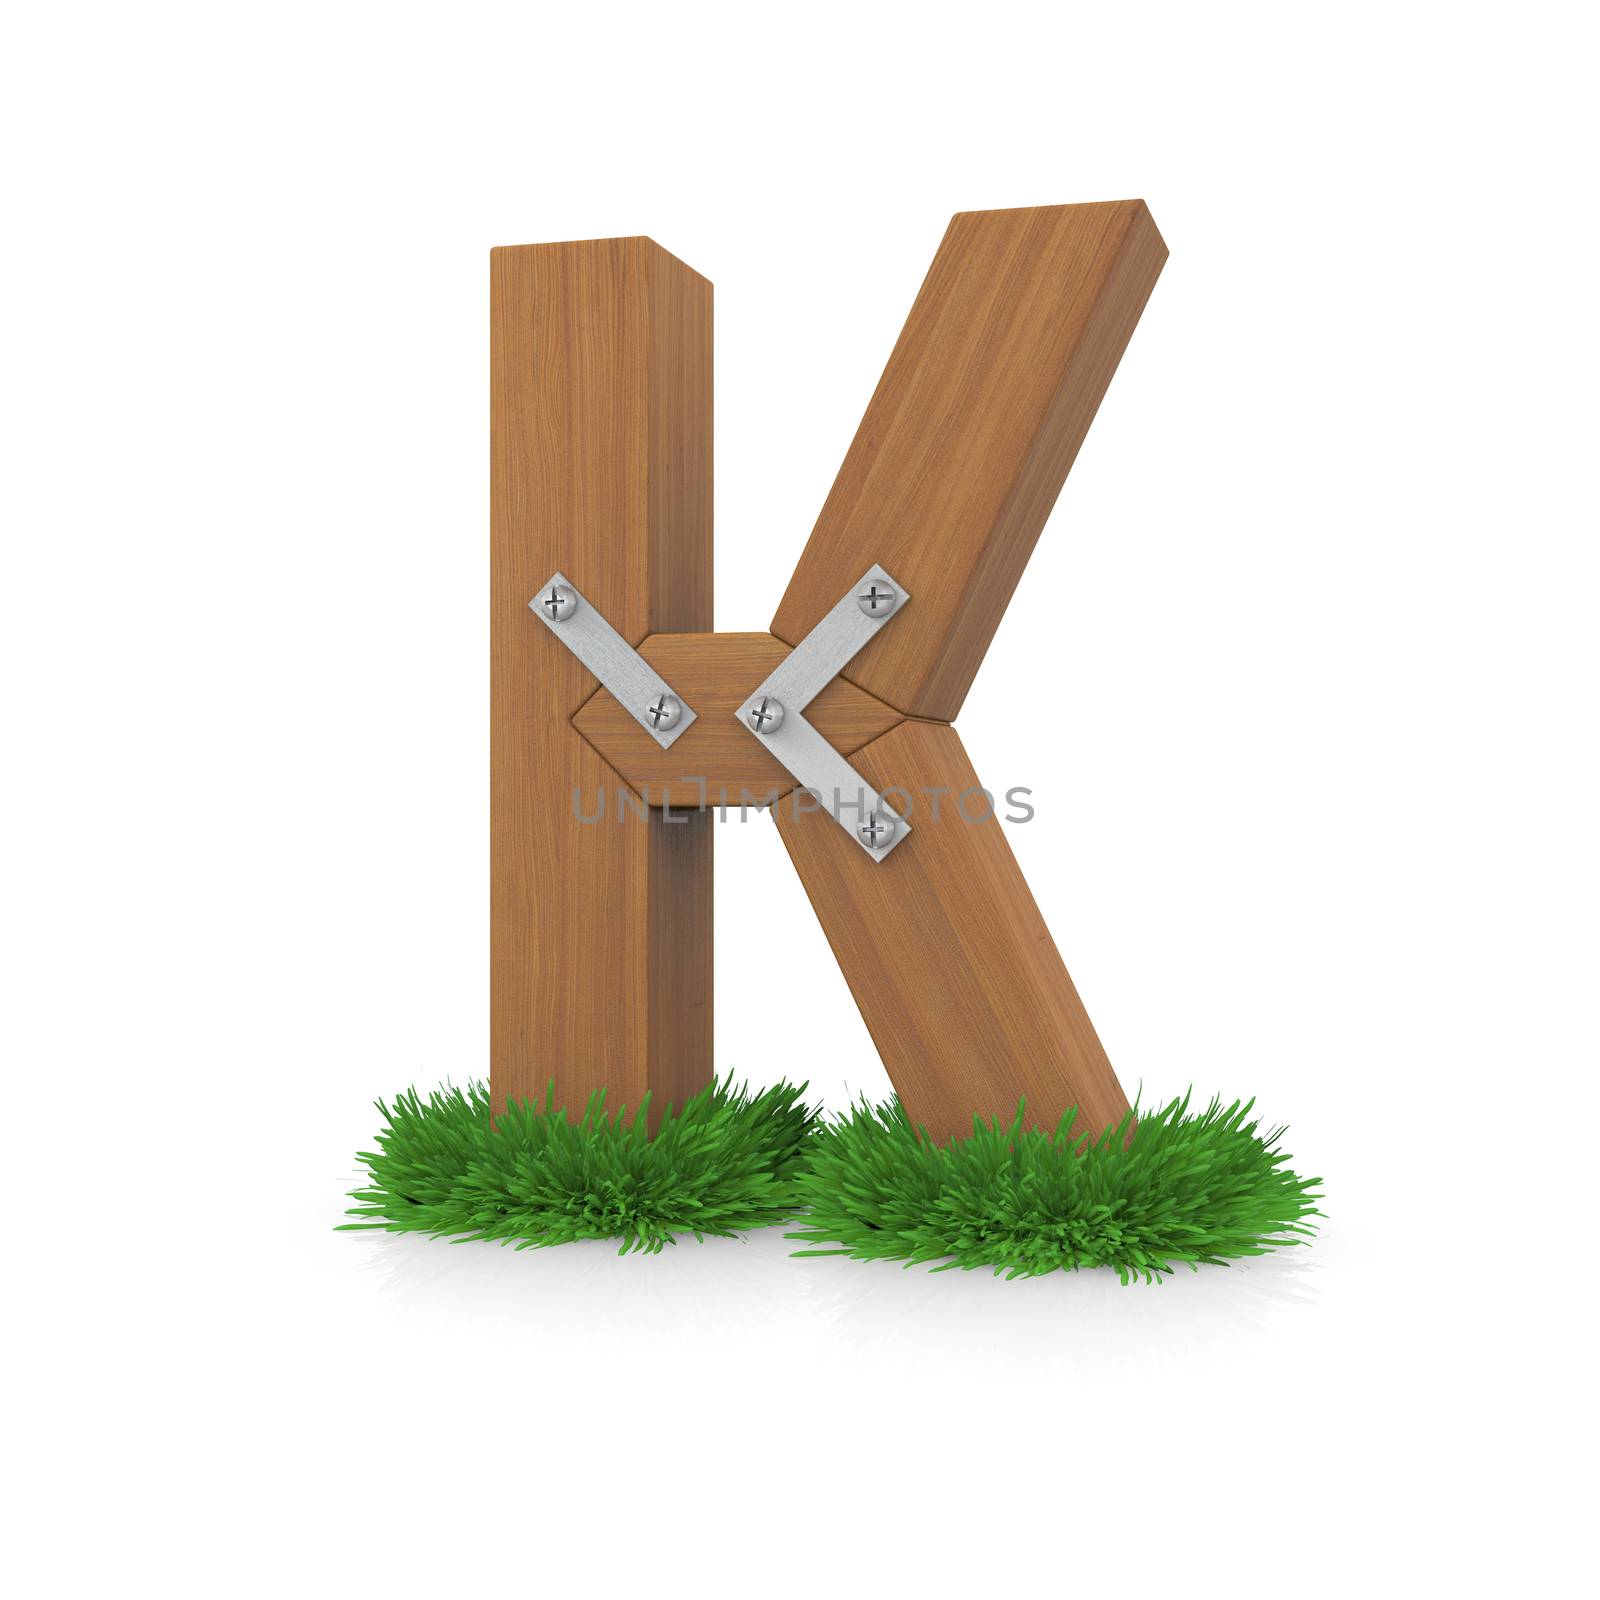 Wooden letter K in the grass. Isolated render with reflection on white background. bio concept